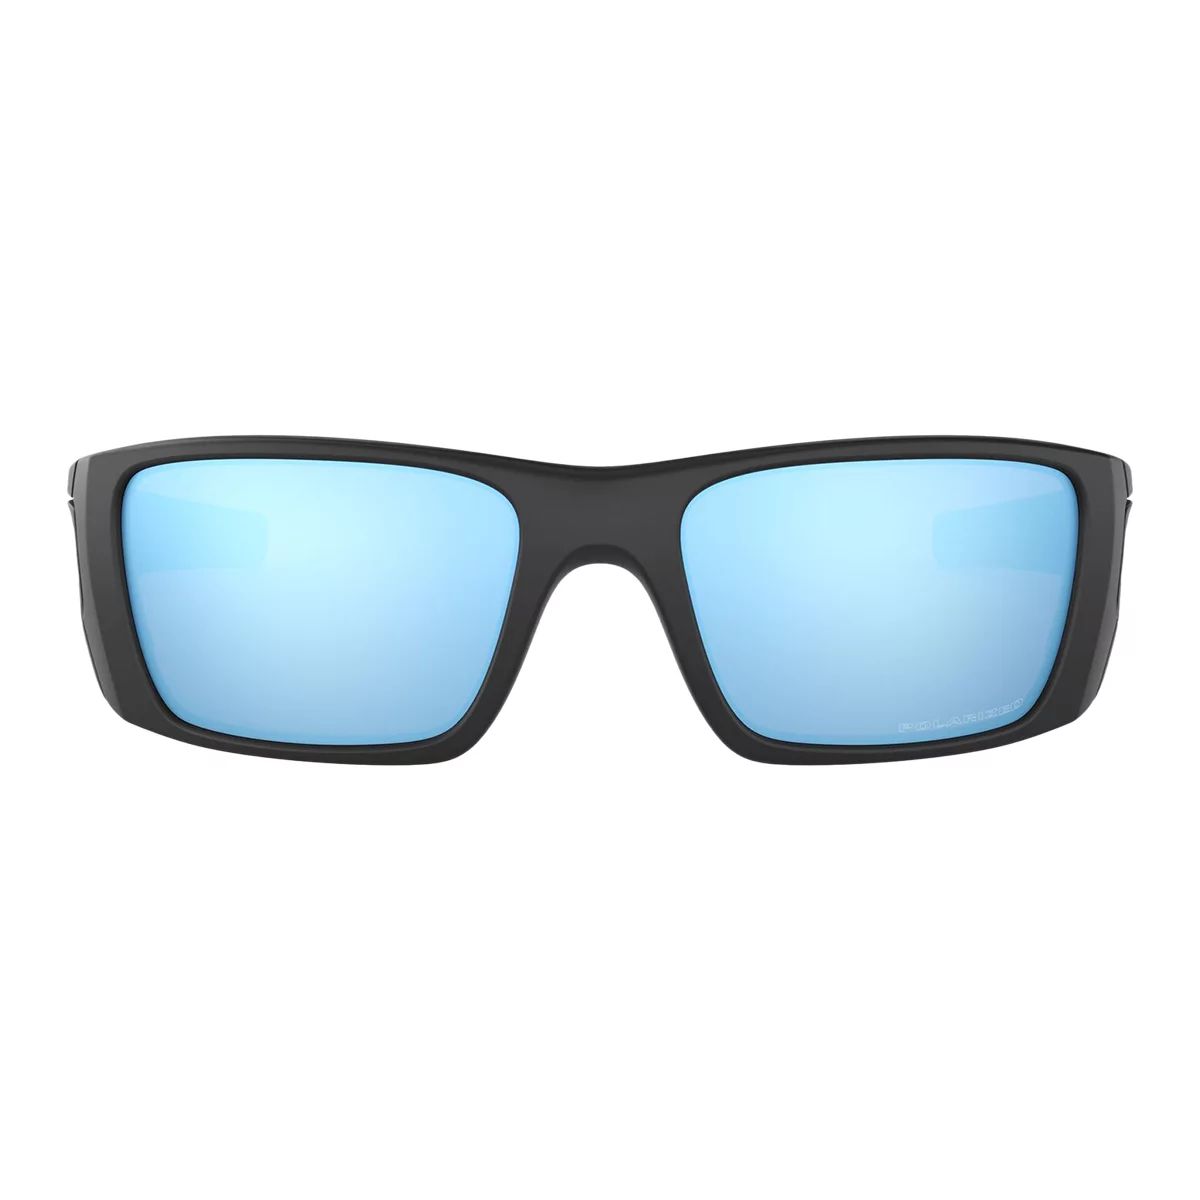 Image of Oakley Fuel Cell Sunglasses